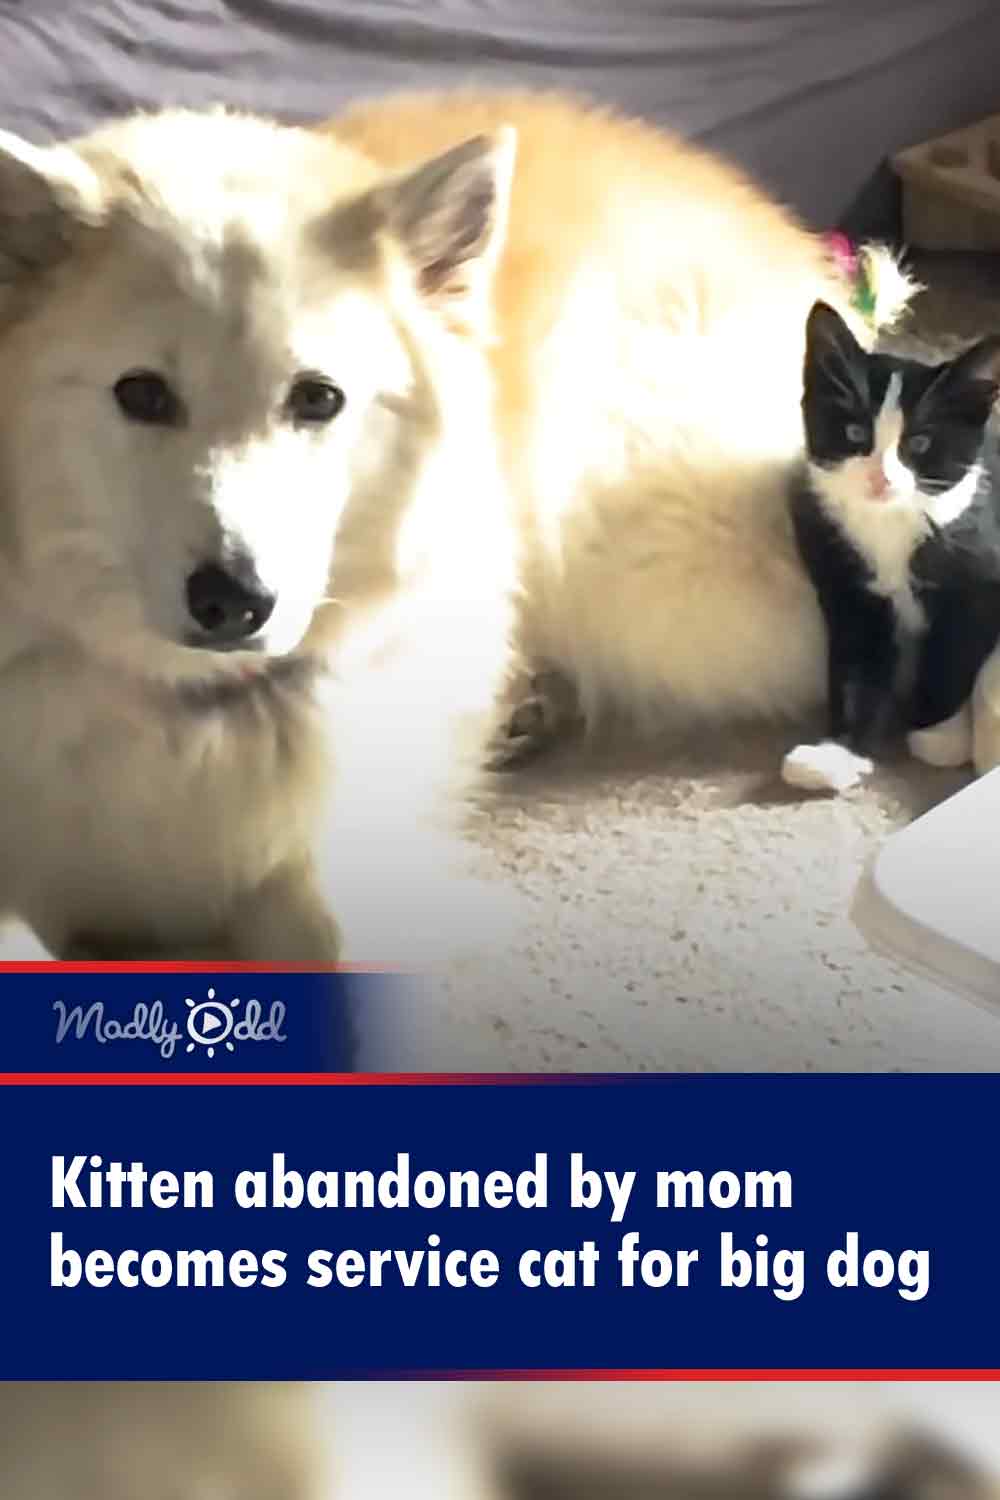 Kitten abandoned by mom becomes service cat for big dog